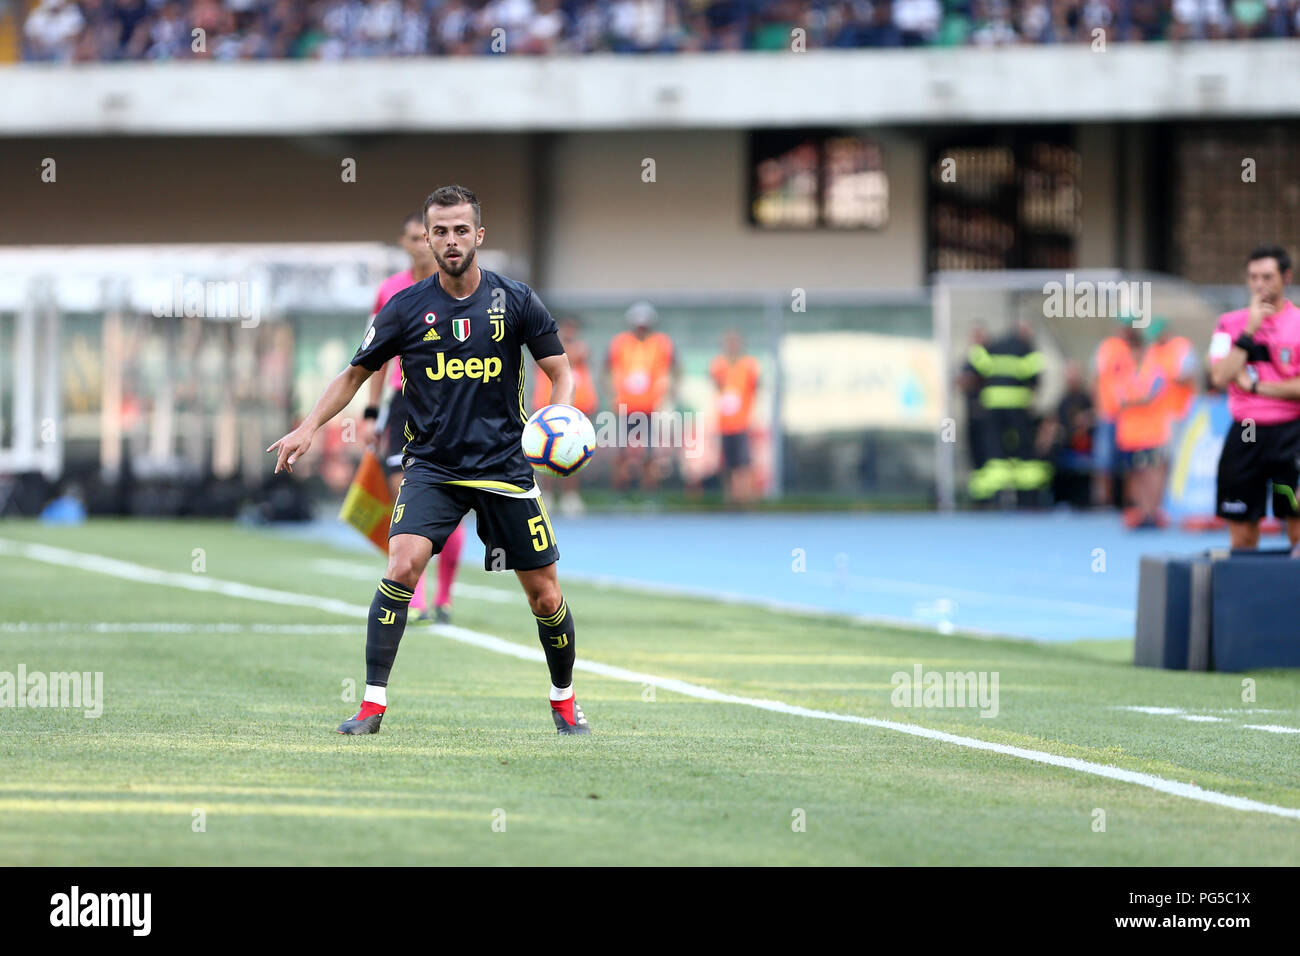 Miralem Pjanic of Juventus FC in action during the Serie A football match between Ac Chievo Verona and Juventus Fc. Stock Photo